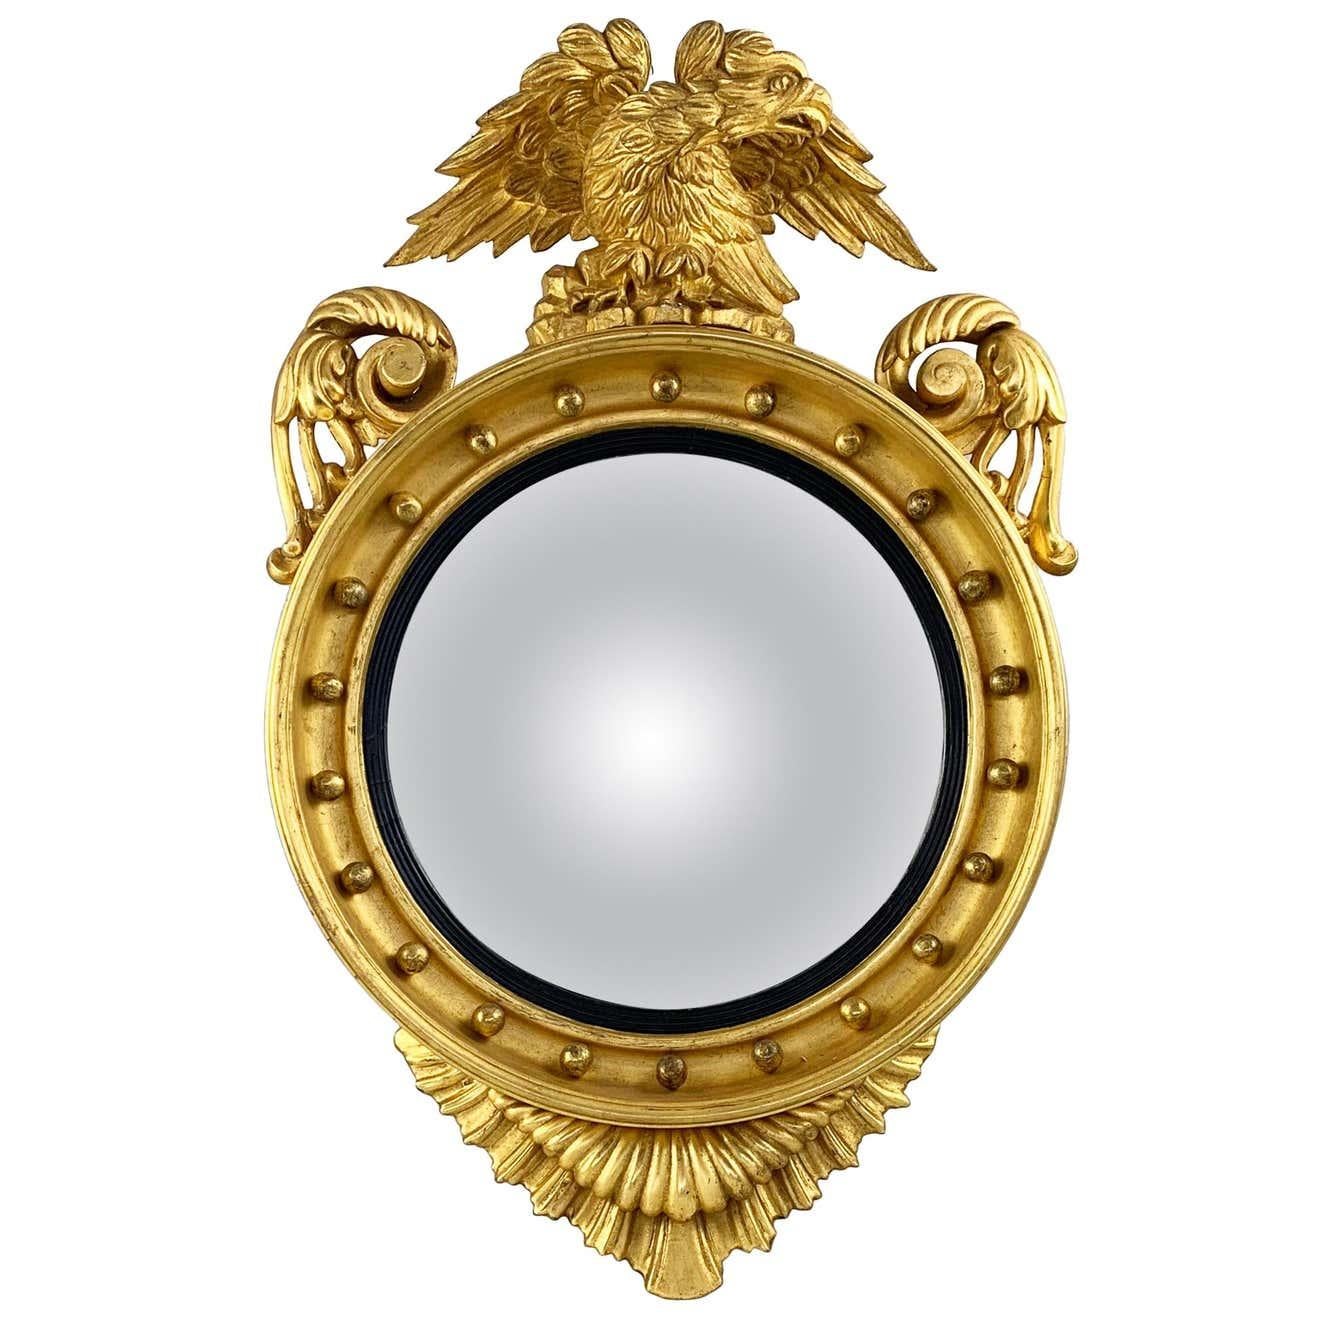 An impressive Regency giltwood carved convex wall mirror. 19th century. With ebonized rim and surmounted by an Eagle.